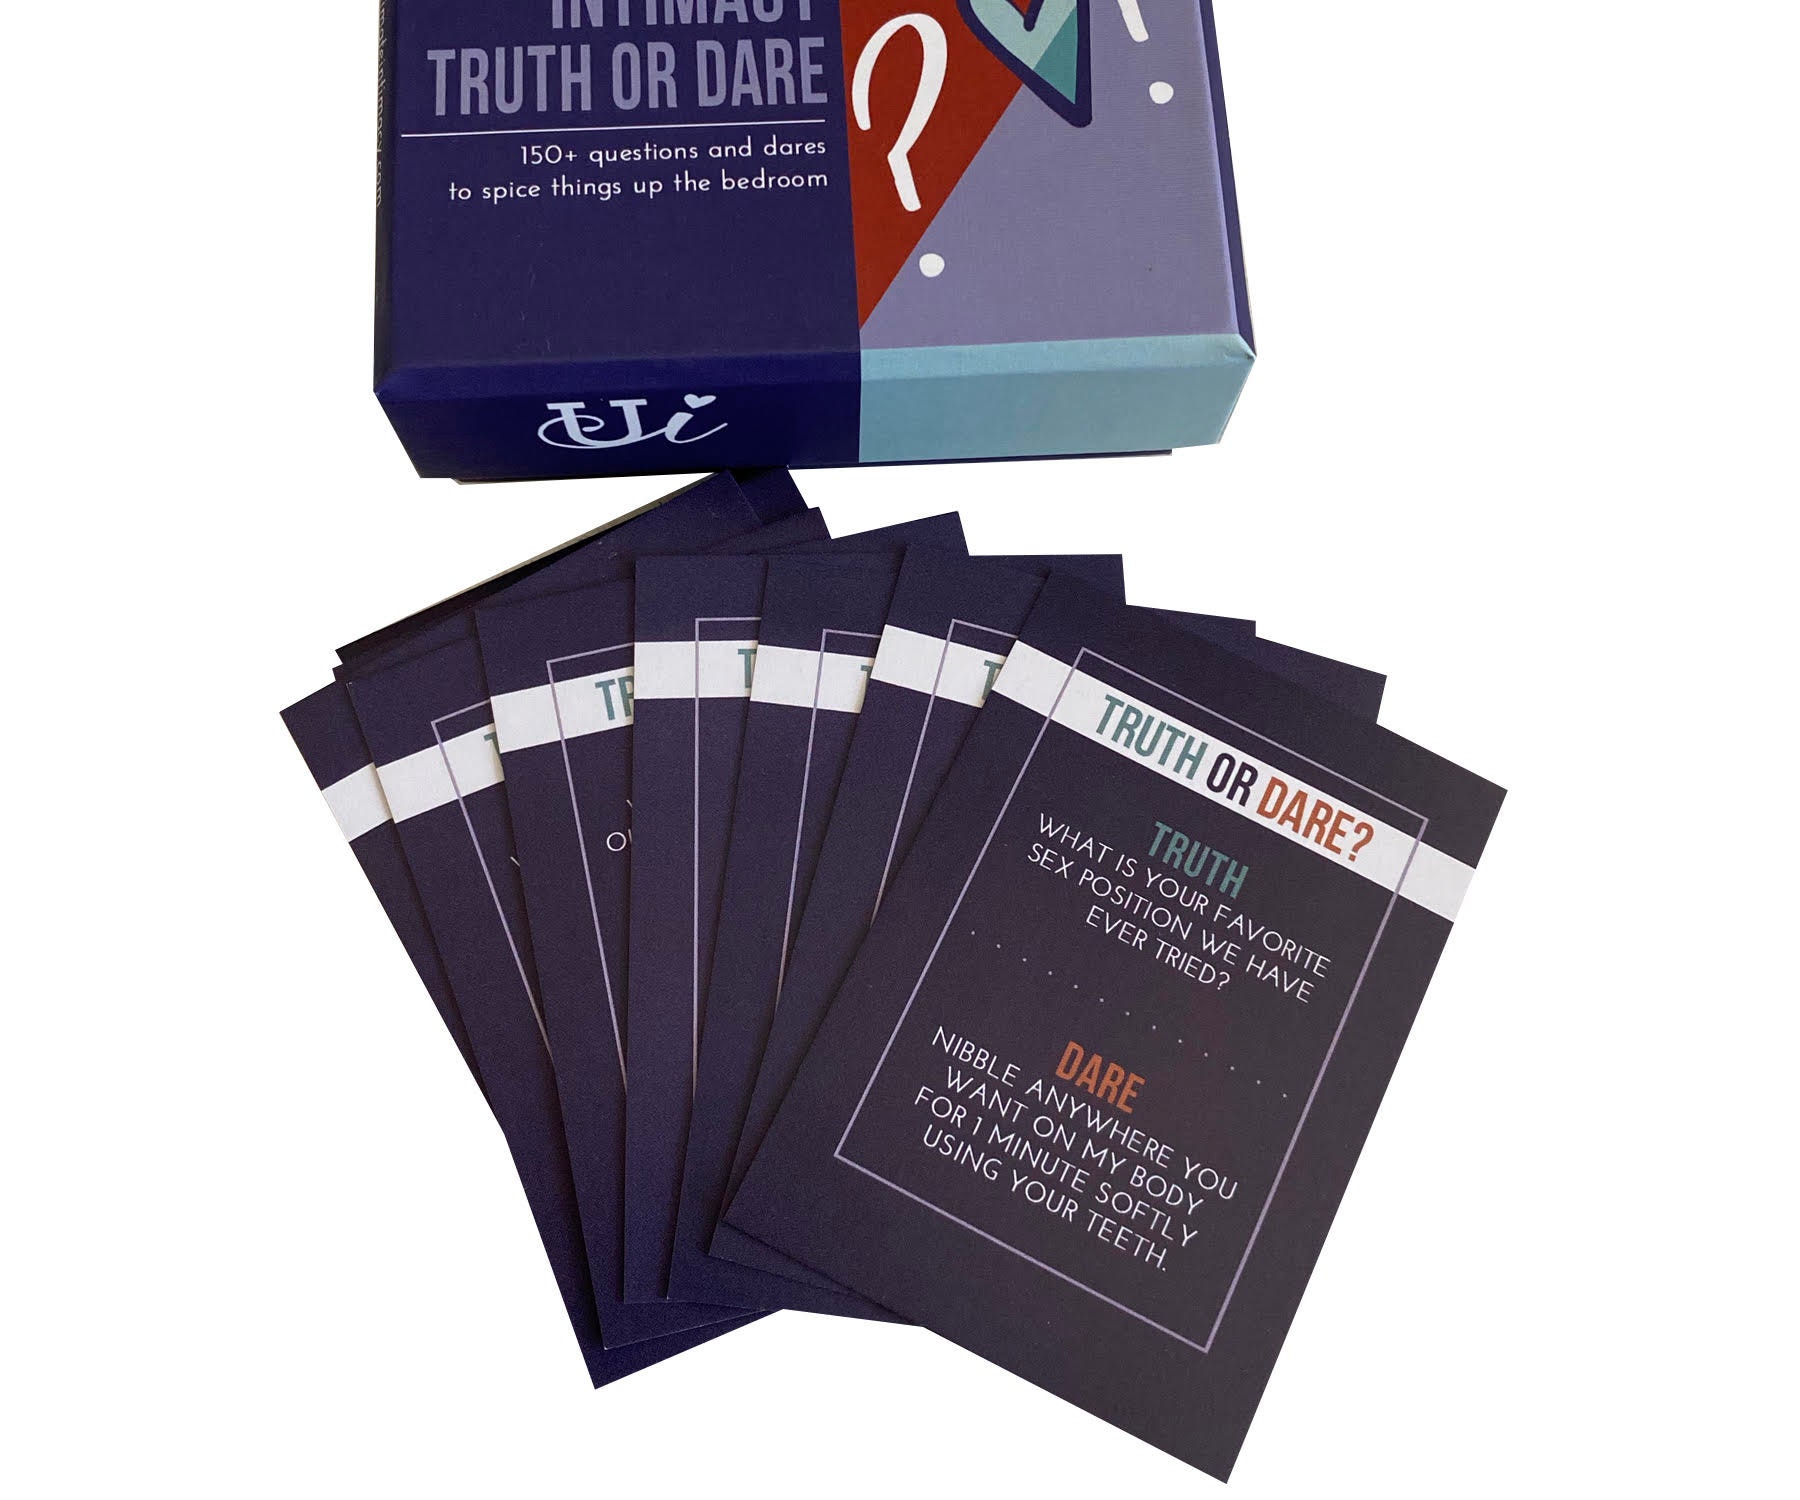 Ultimate Intimacy Truth or Dare Card Deck Bedroom Game Date image picture